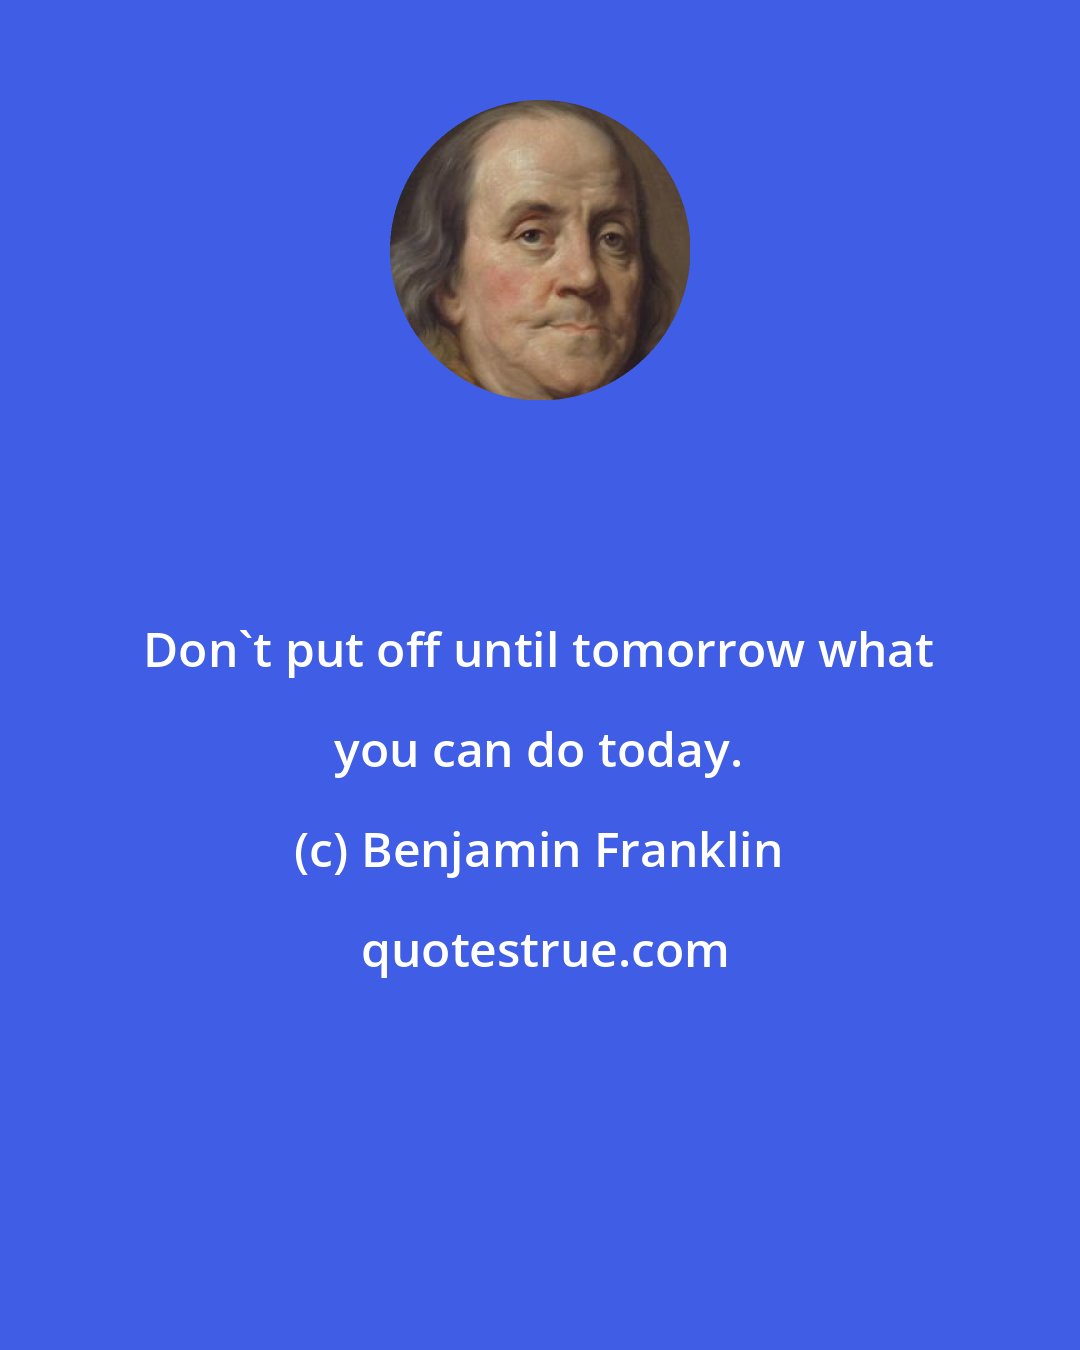 Benjamin Franklin: Don't put off until tomorrow what you can do today.